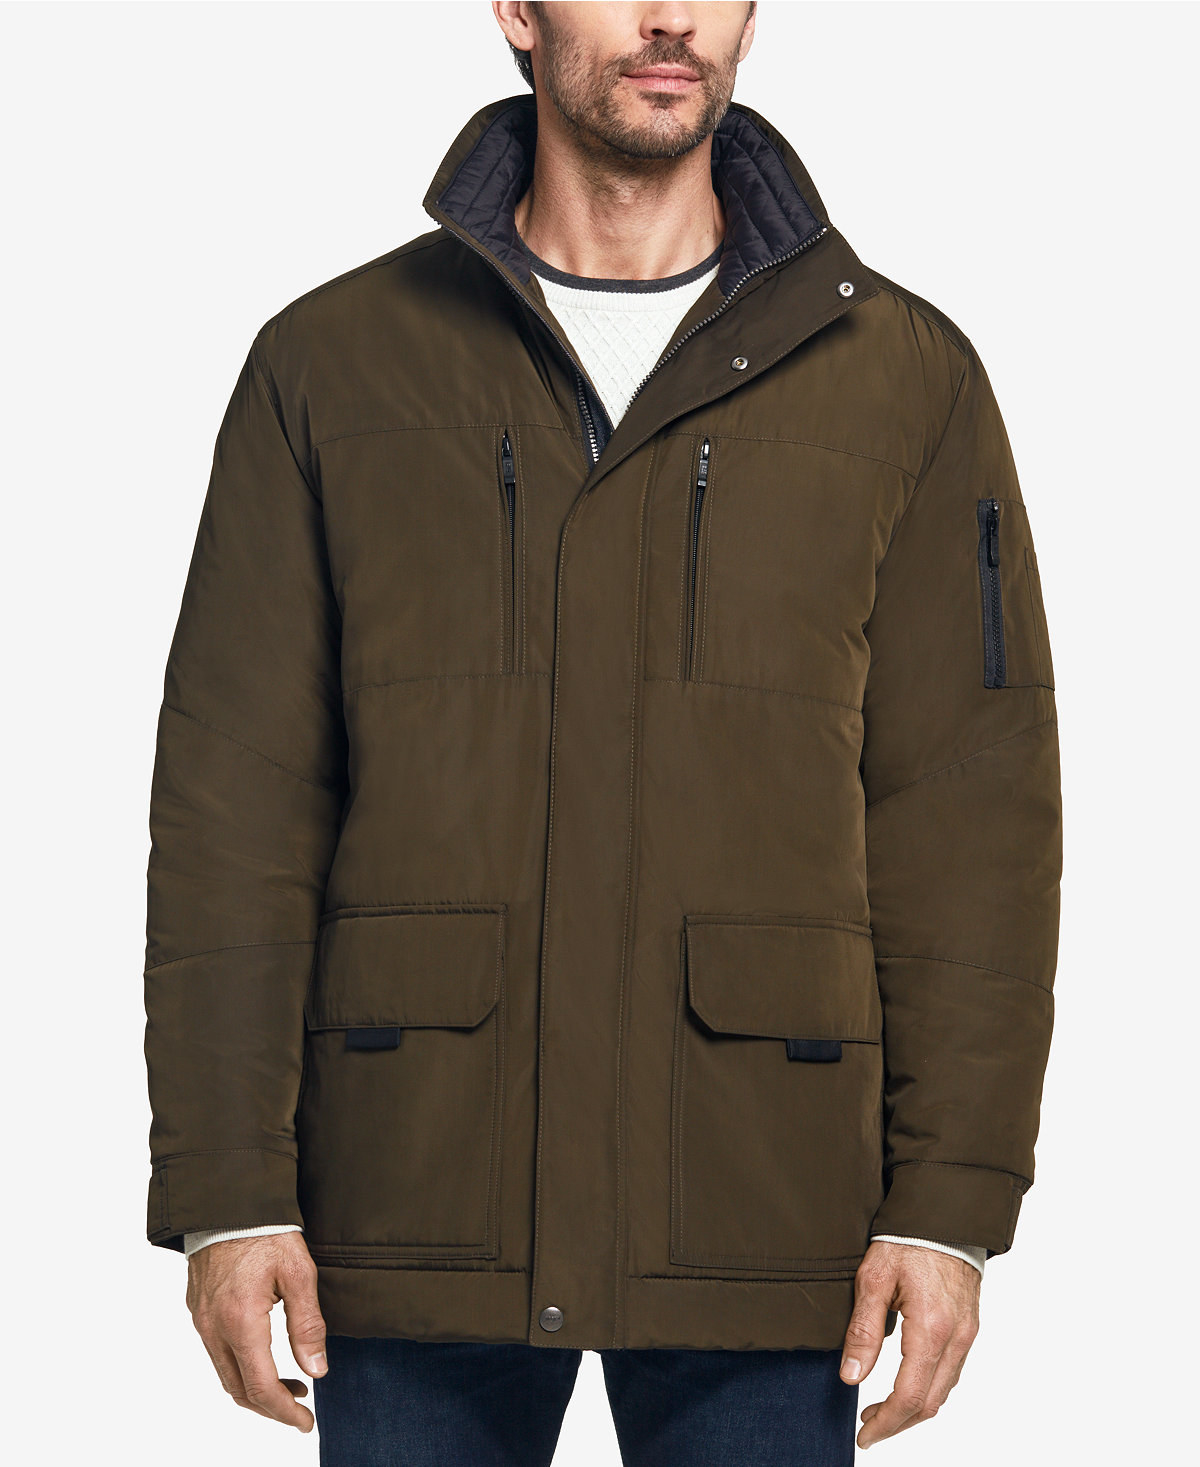 39 Men's Winter Jackets That Look Expensive But Are Actually Super Cheap